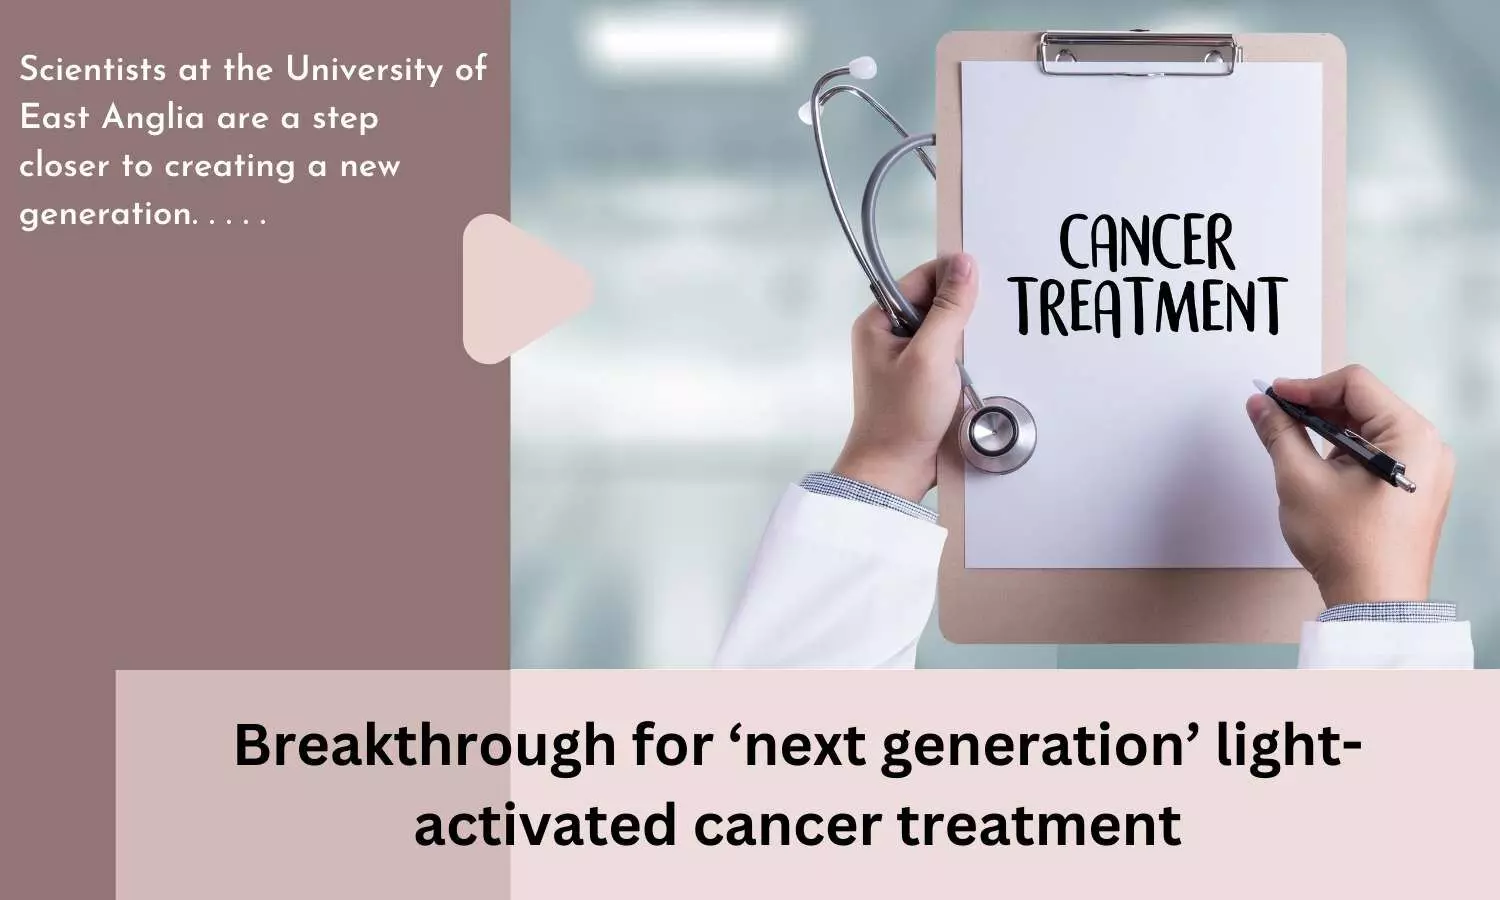 Breakthrough for next generation light-activated cancer treatment